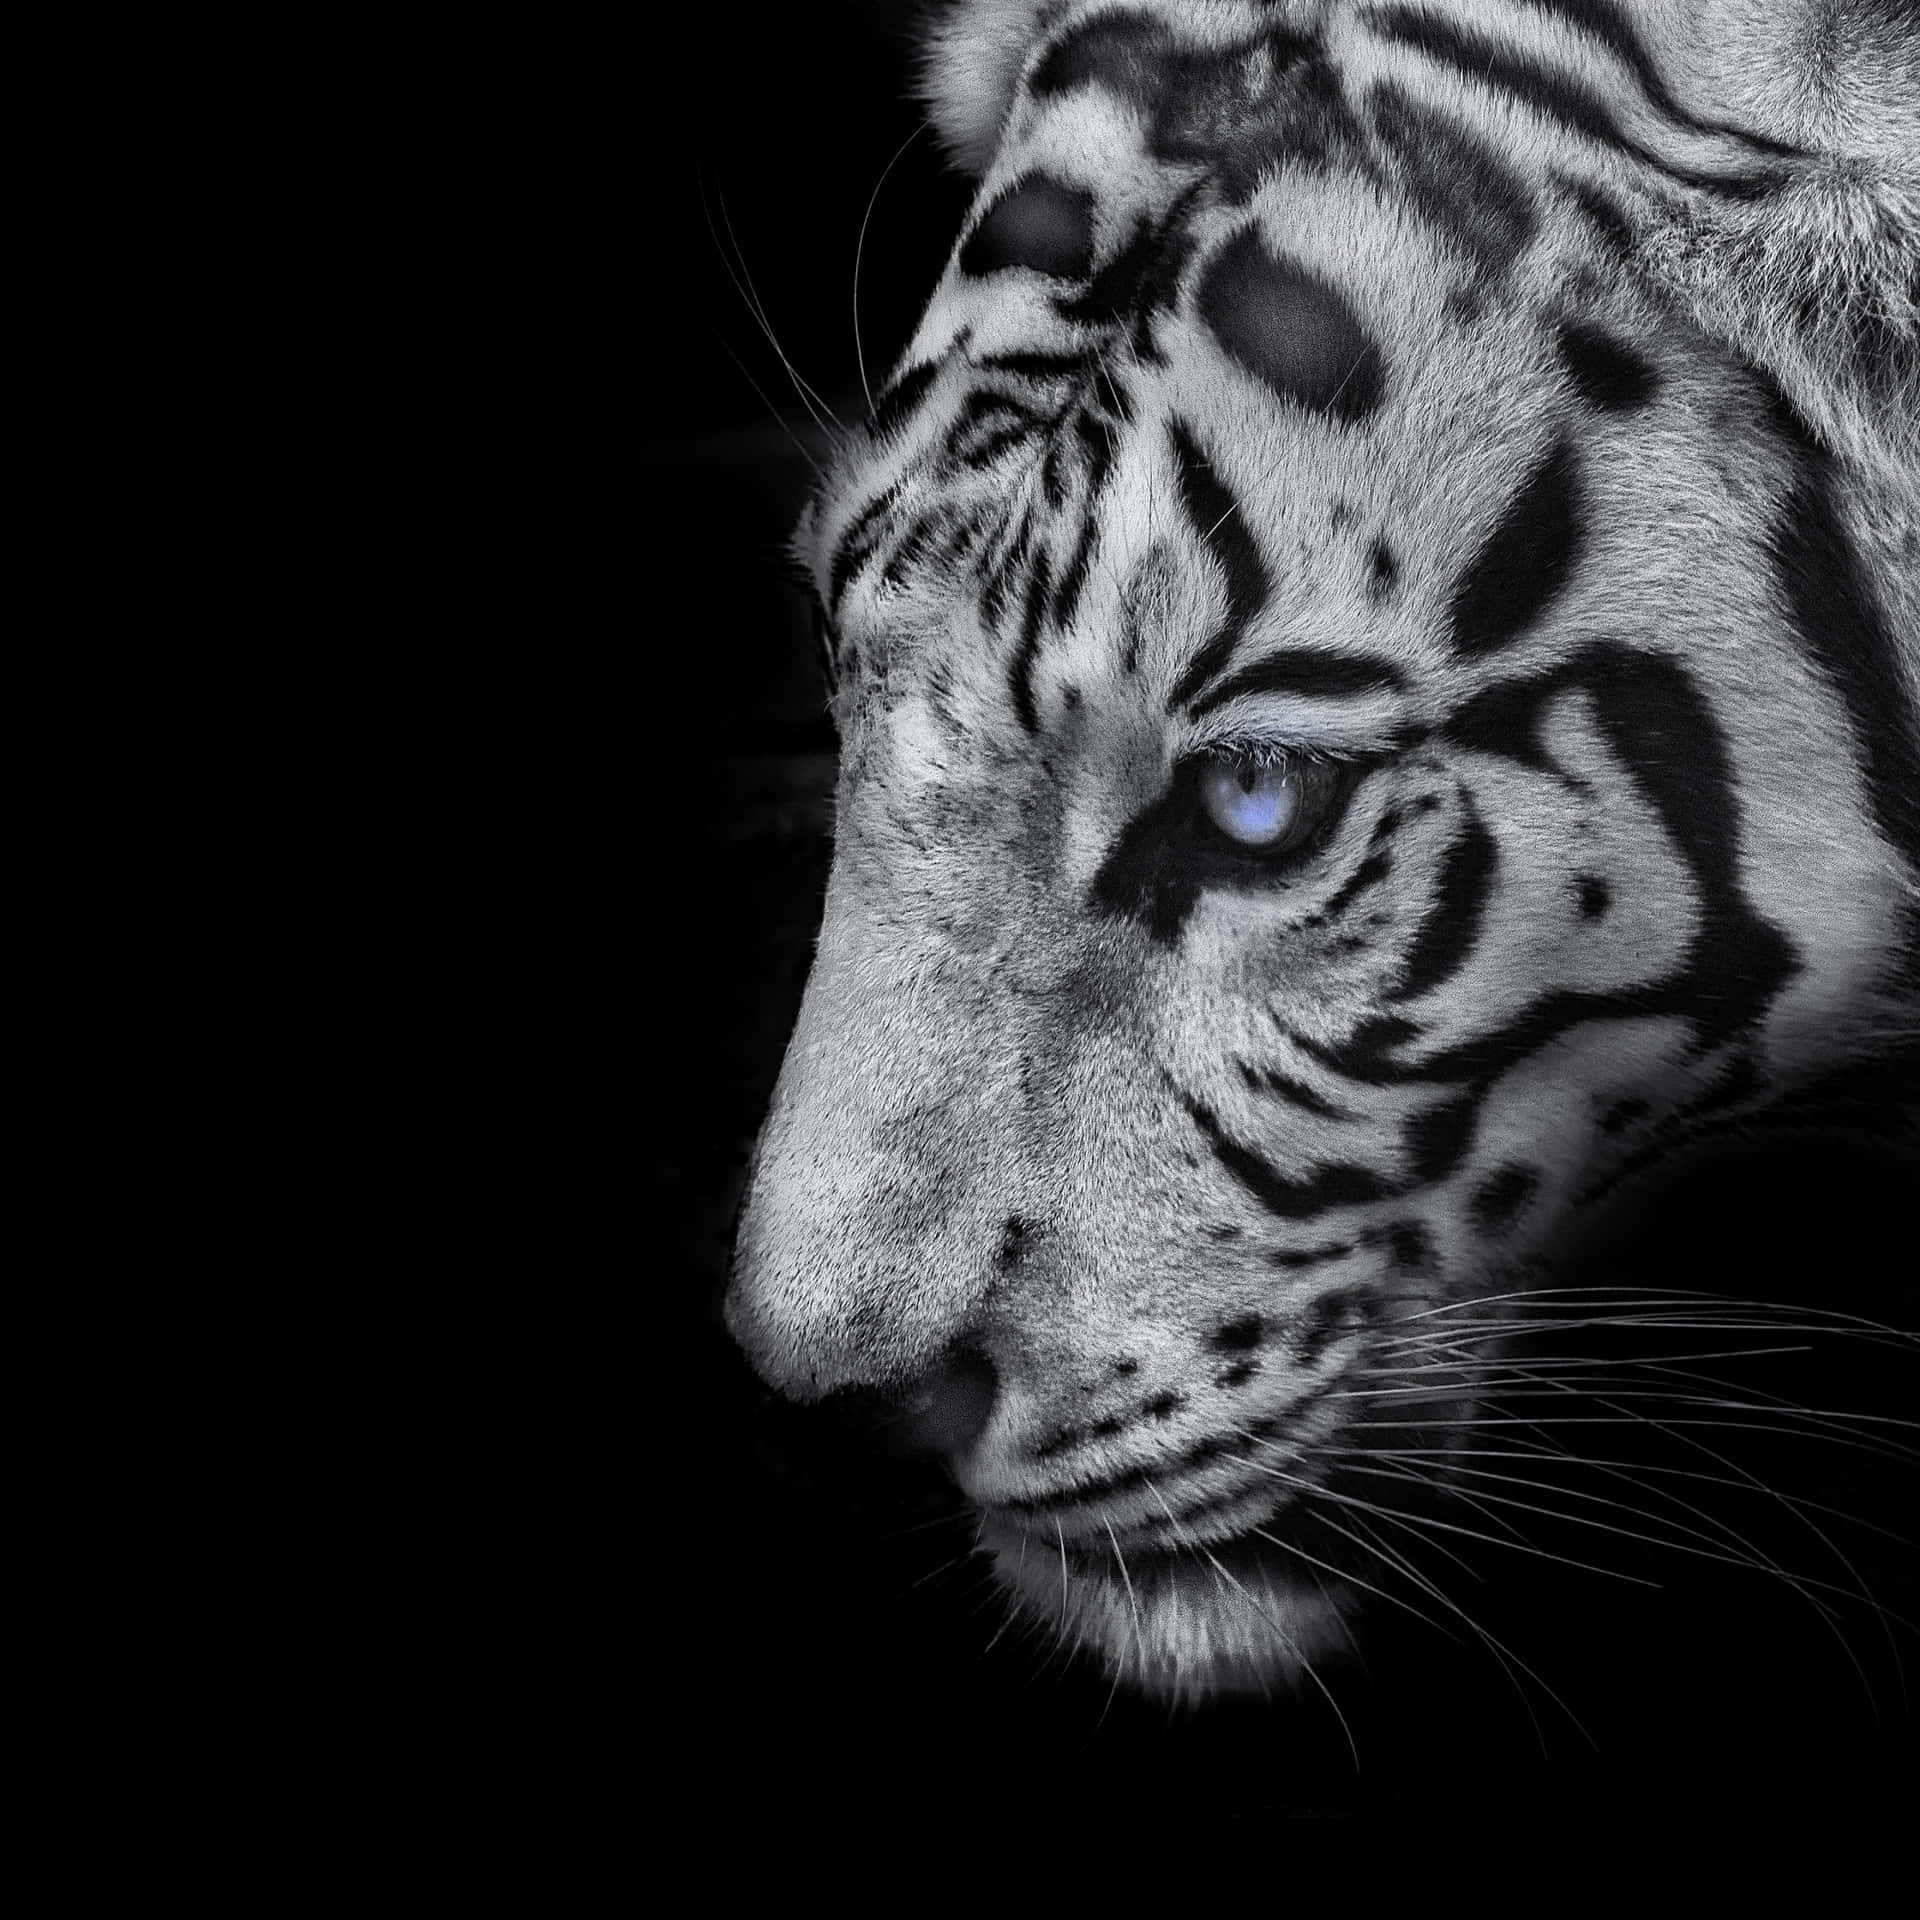 Monochrome Tiger With Blue Eye Background